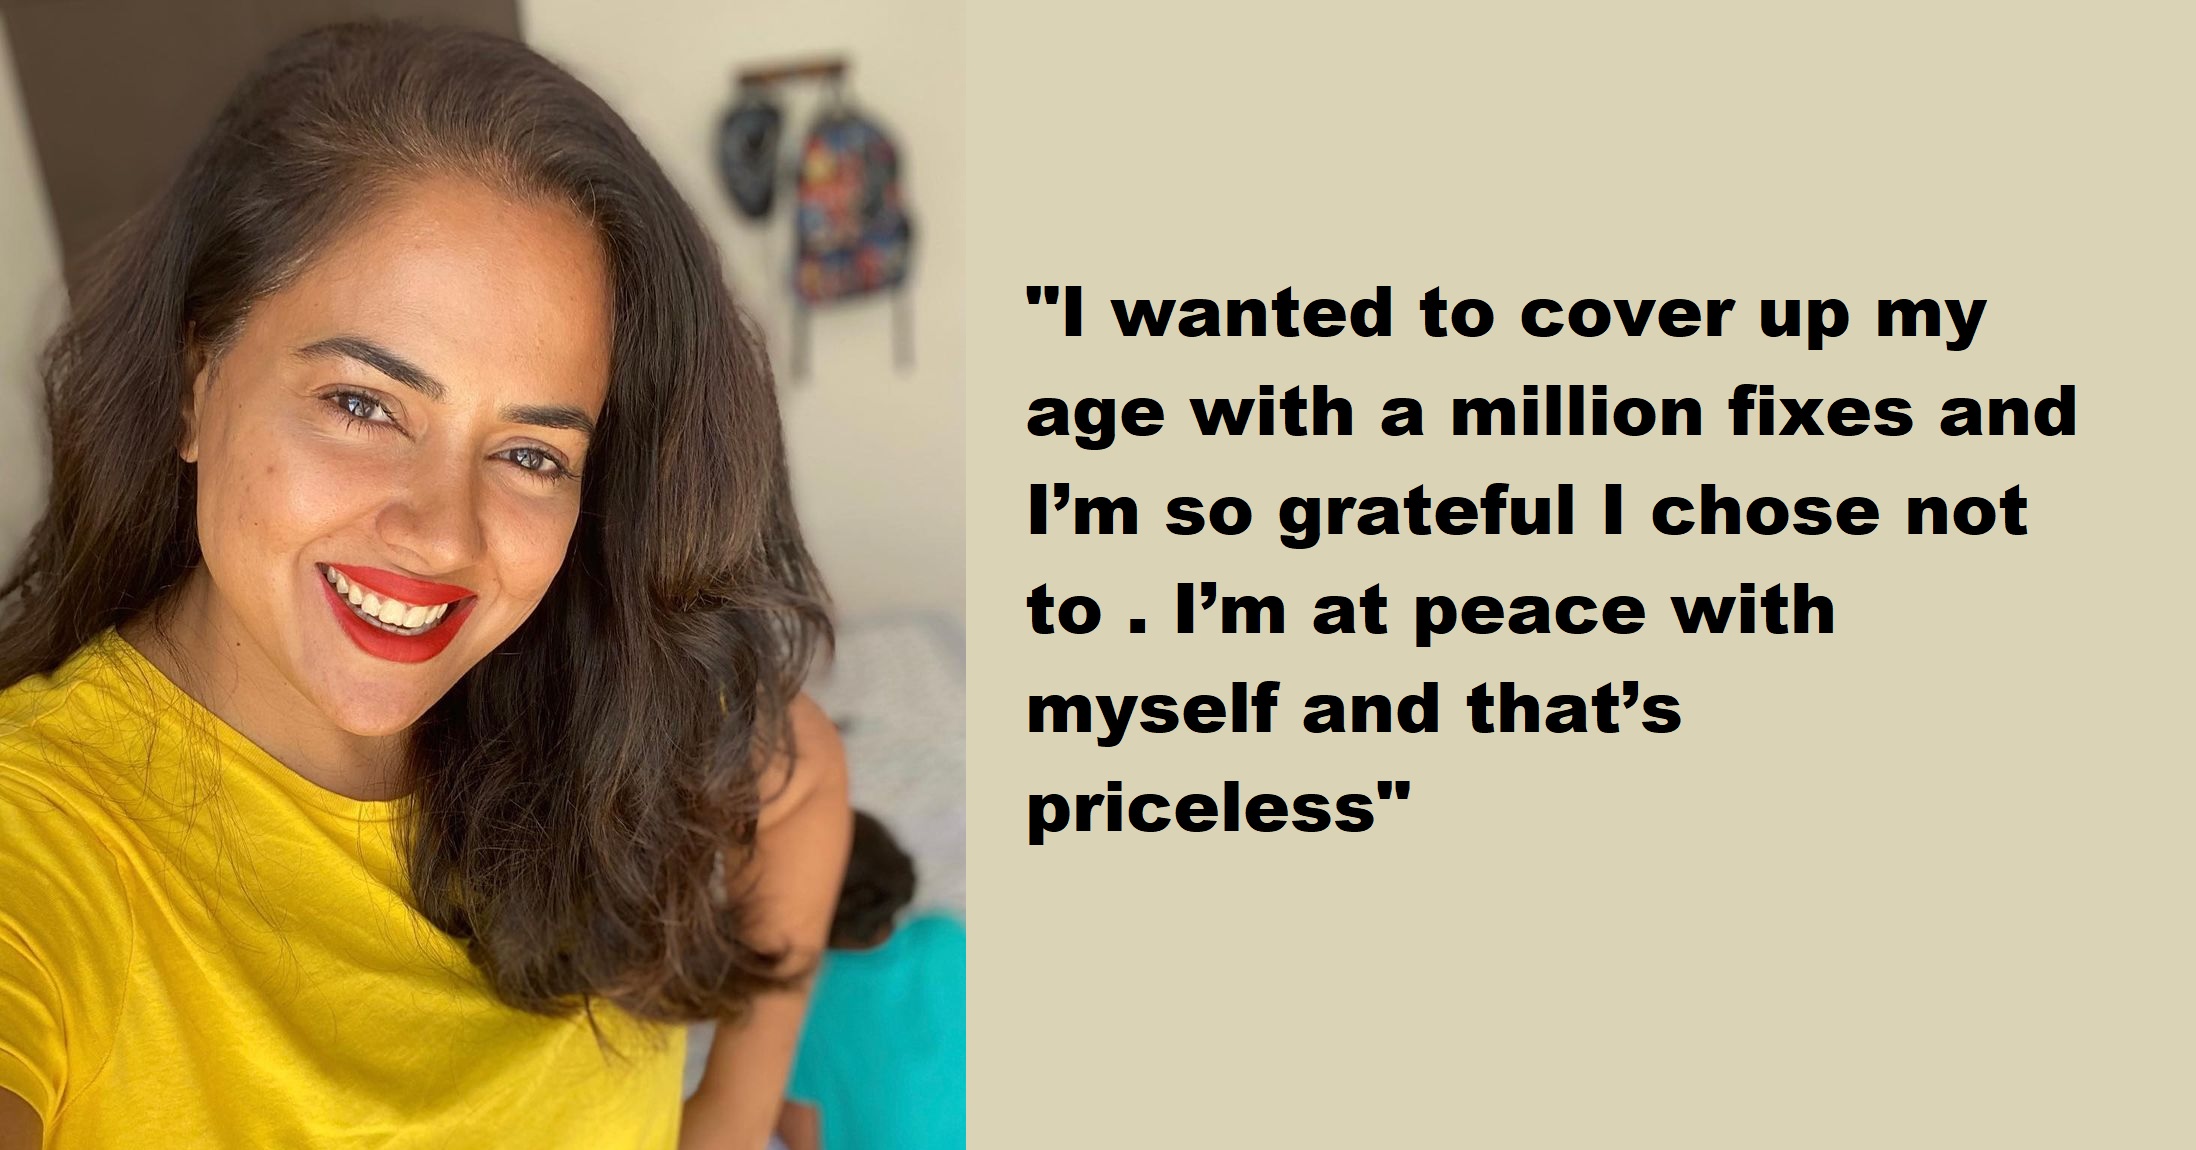 Sameera Reddy Talks About Breaking Beauty Standards On Social Media, “Showing Stretch Marks, Grey Hair & Belly”